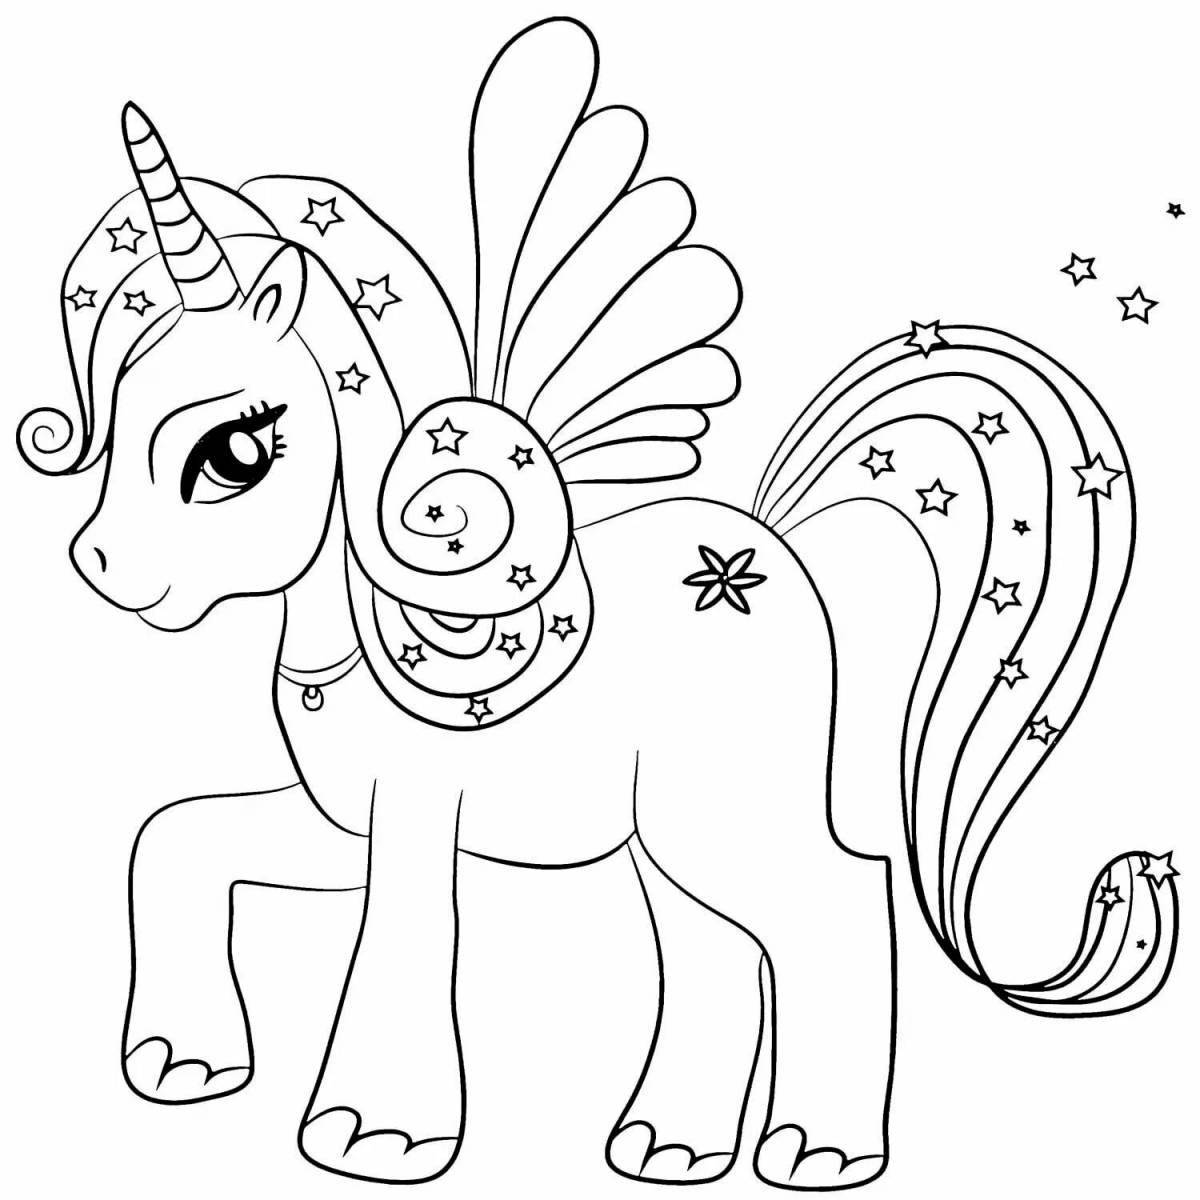 Magic unicorn coloring book for kids 5-6 years old